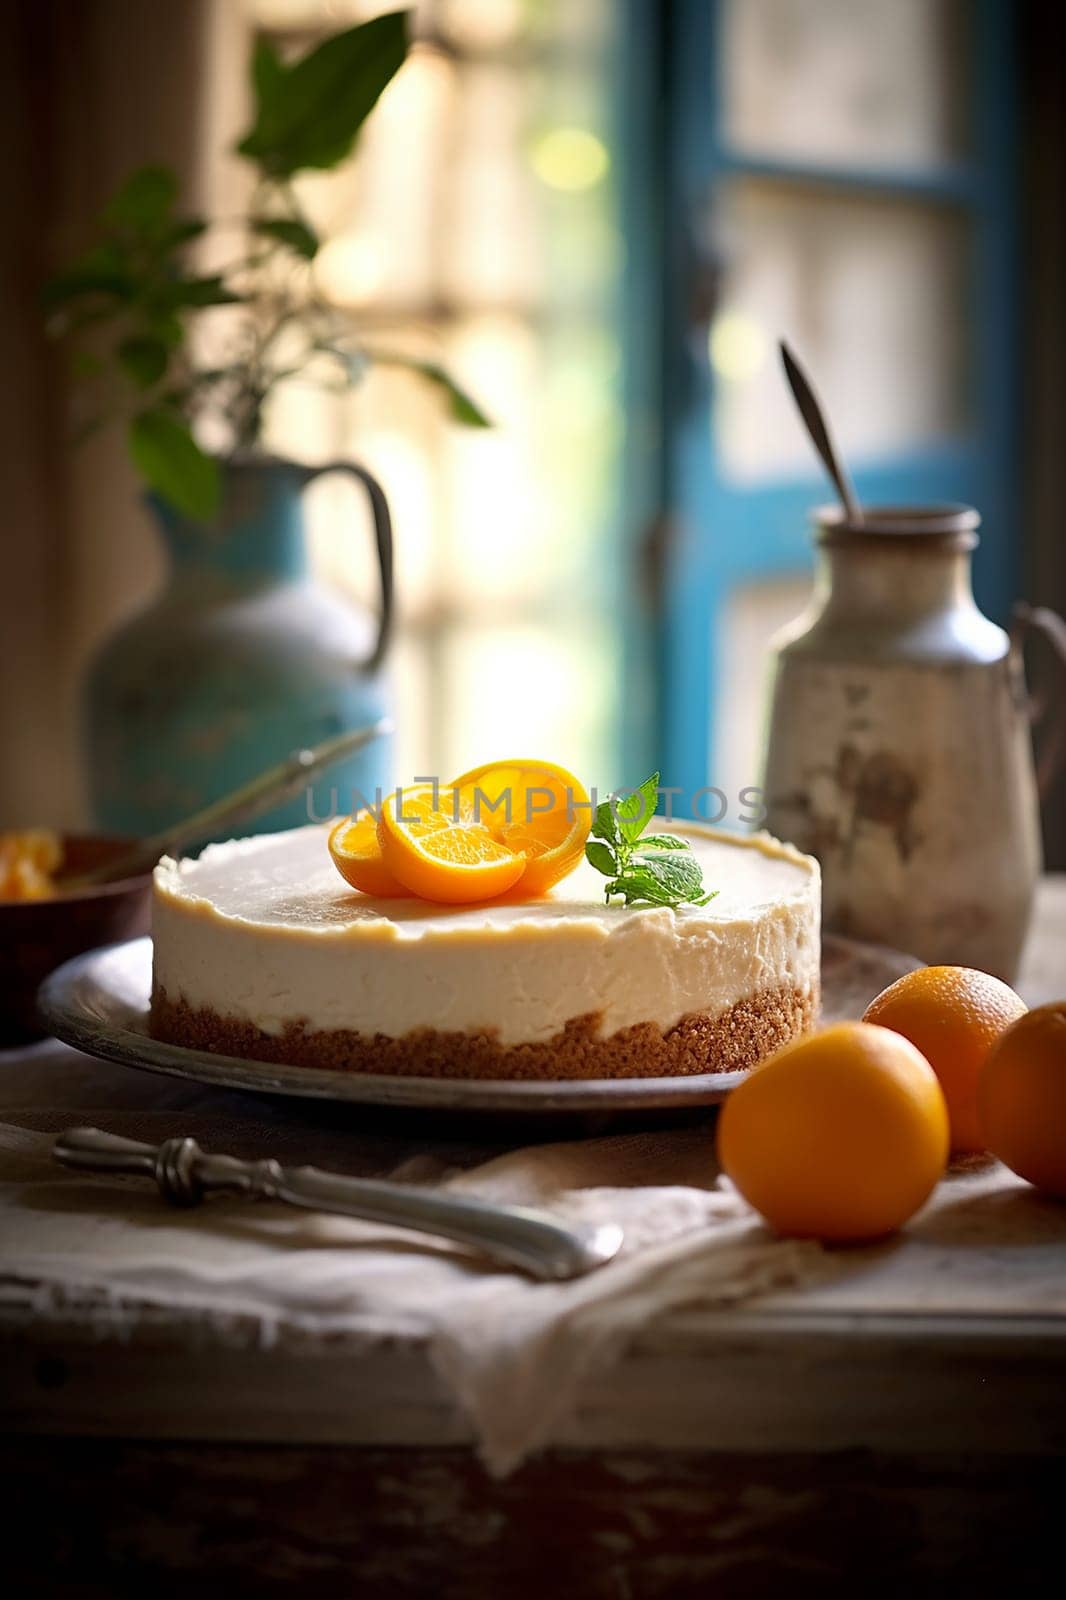 Citrus cheesecake on wooden table with fresh oranges and milk pitcher